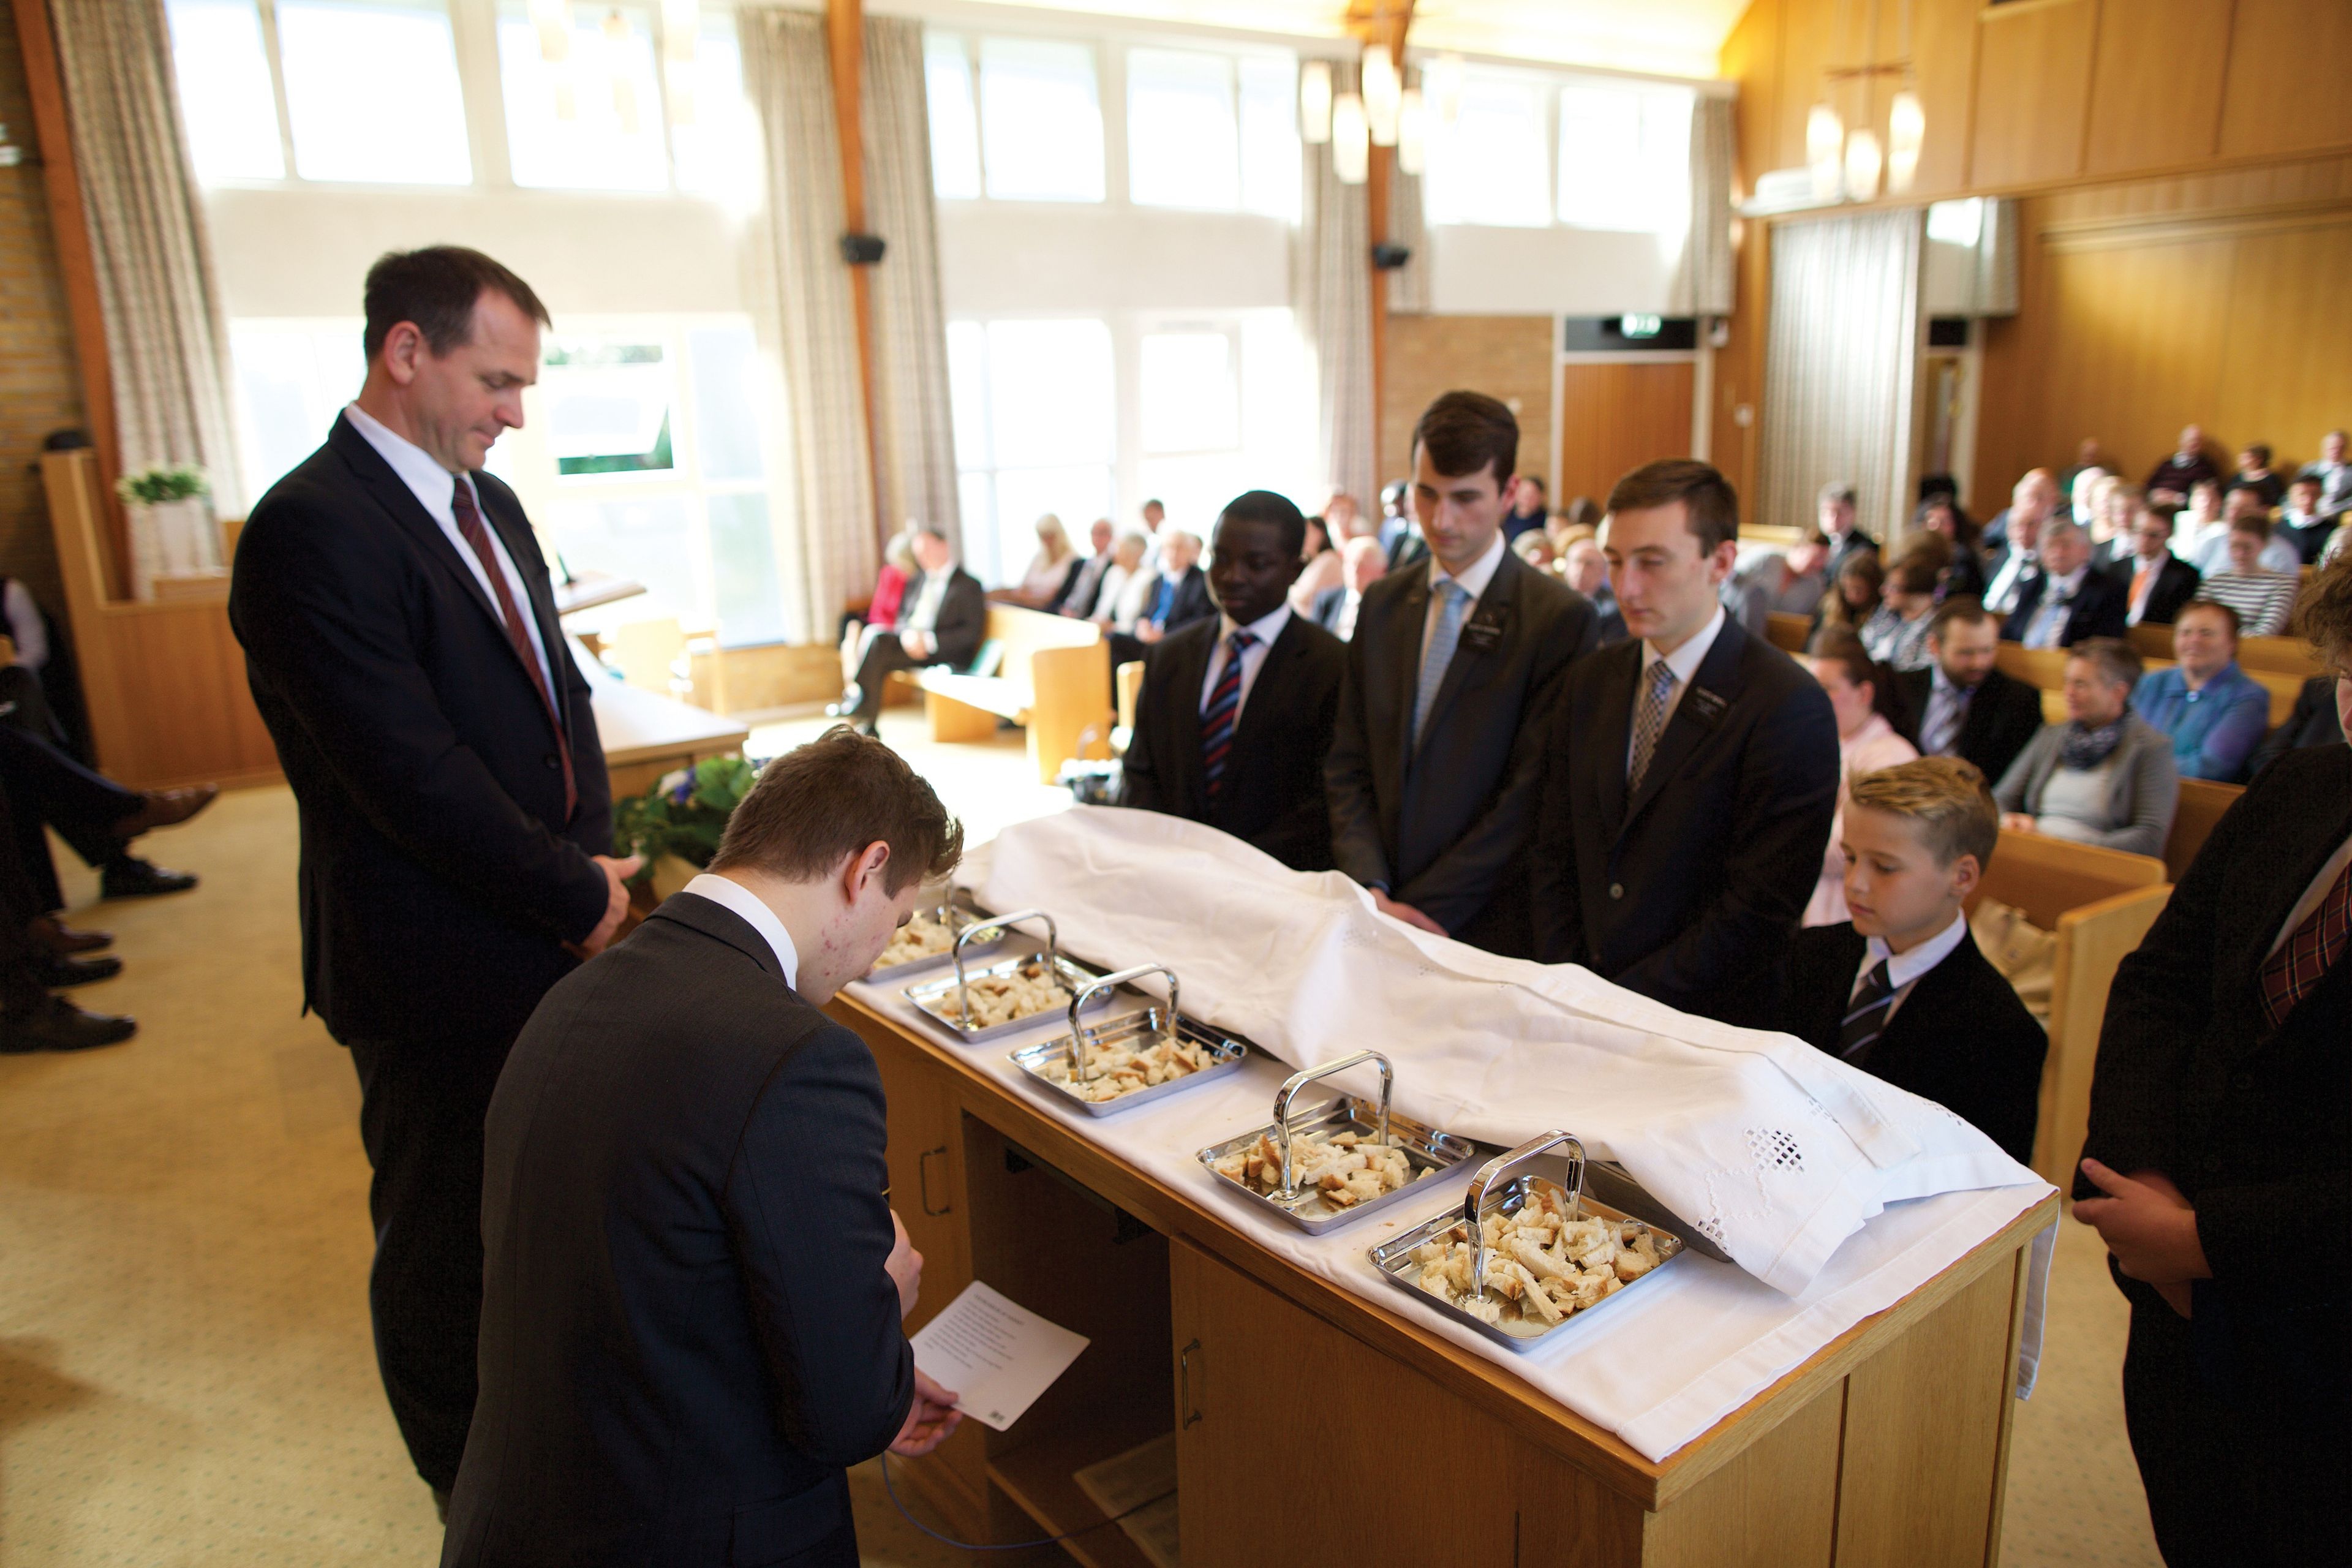 The sacrament being blessed for a congregation in Norway.